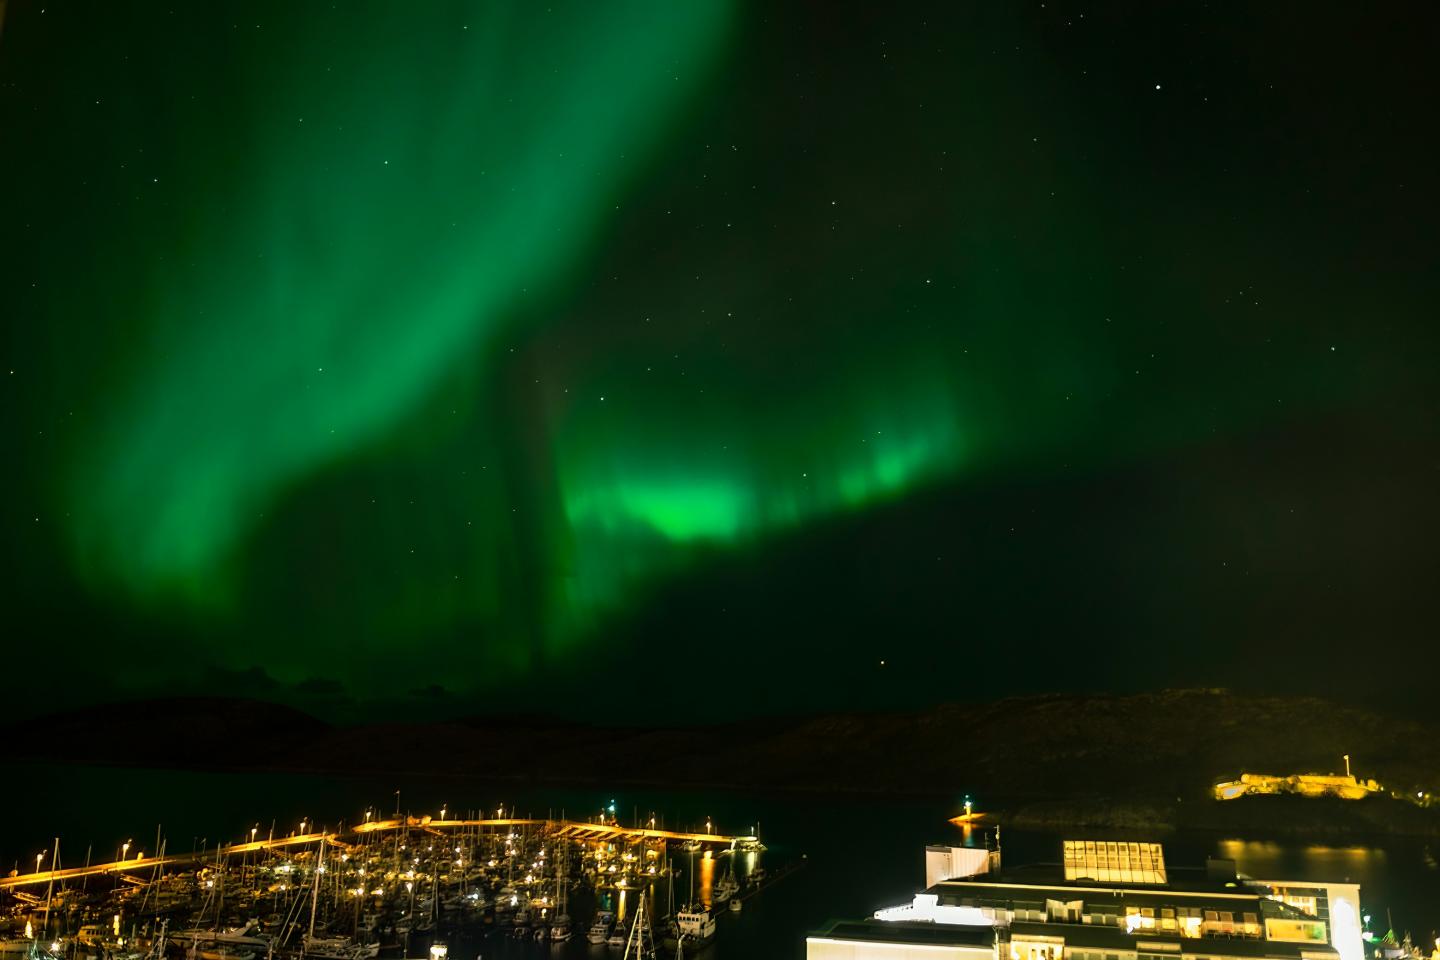 A photo of green aurora in the night time sky with brightly lit boats beneath